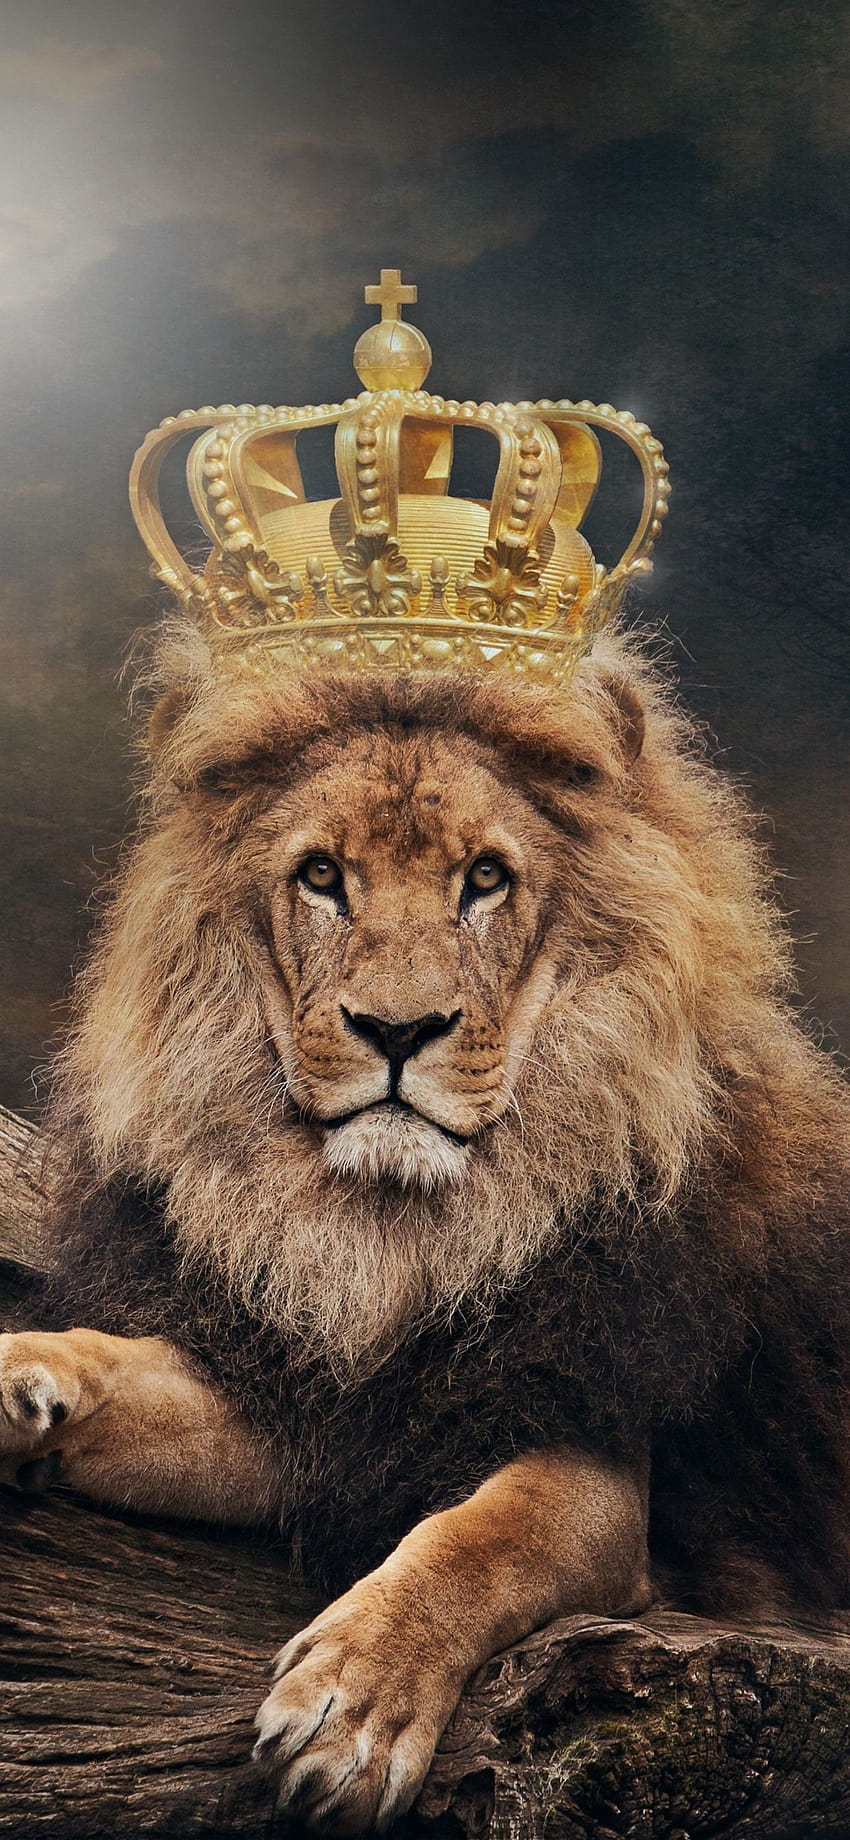 Iphone Lion, King, Crown, lion iphone HD phone wallpaper